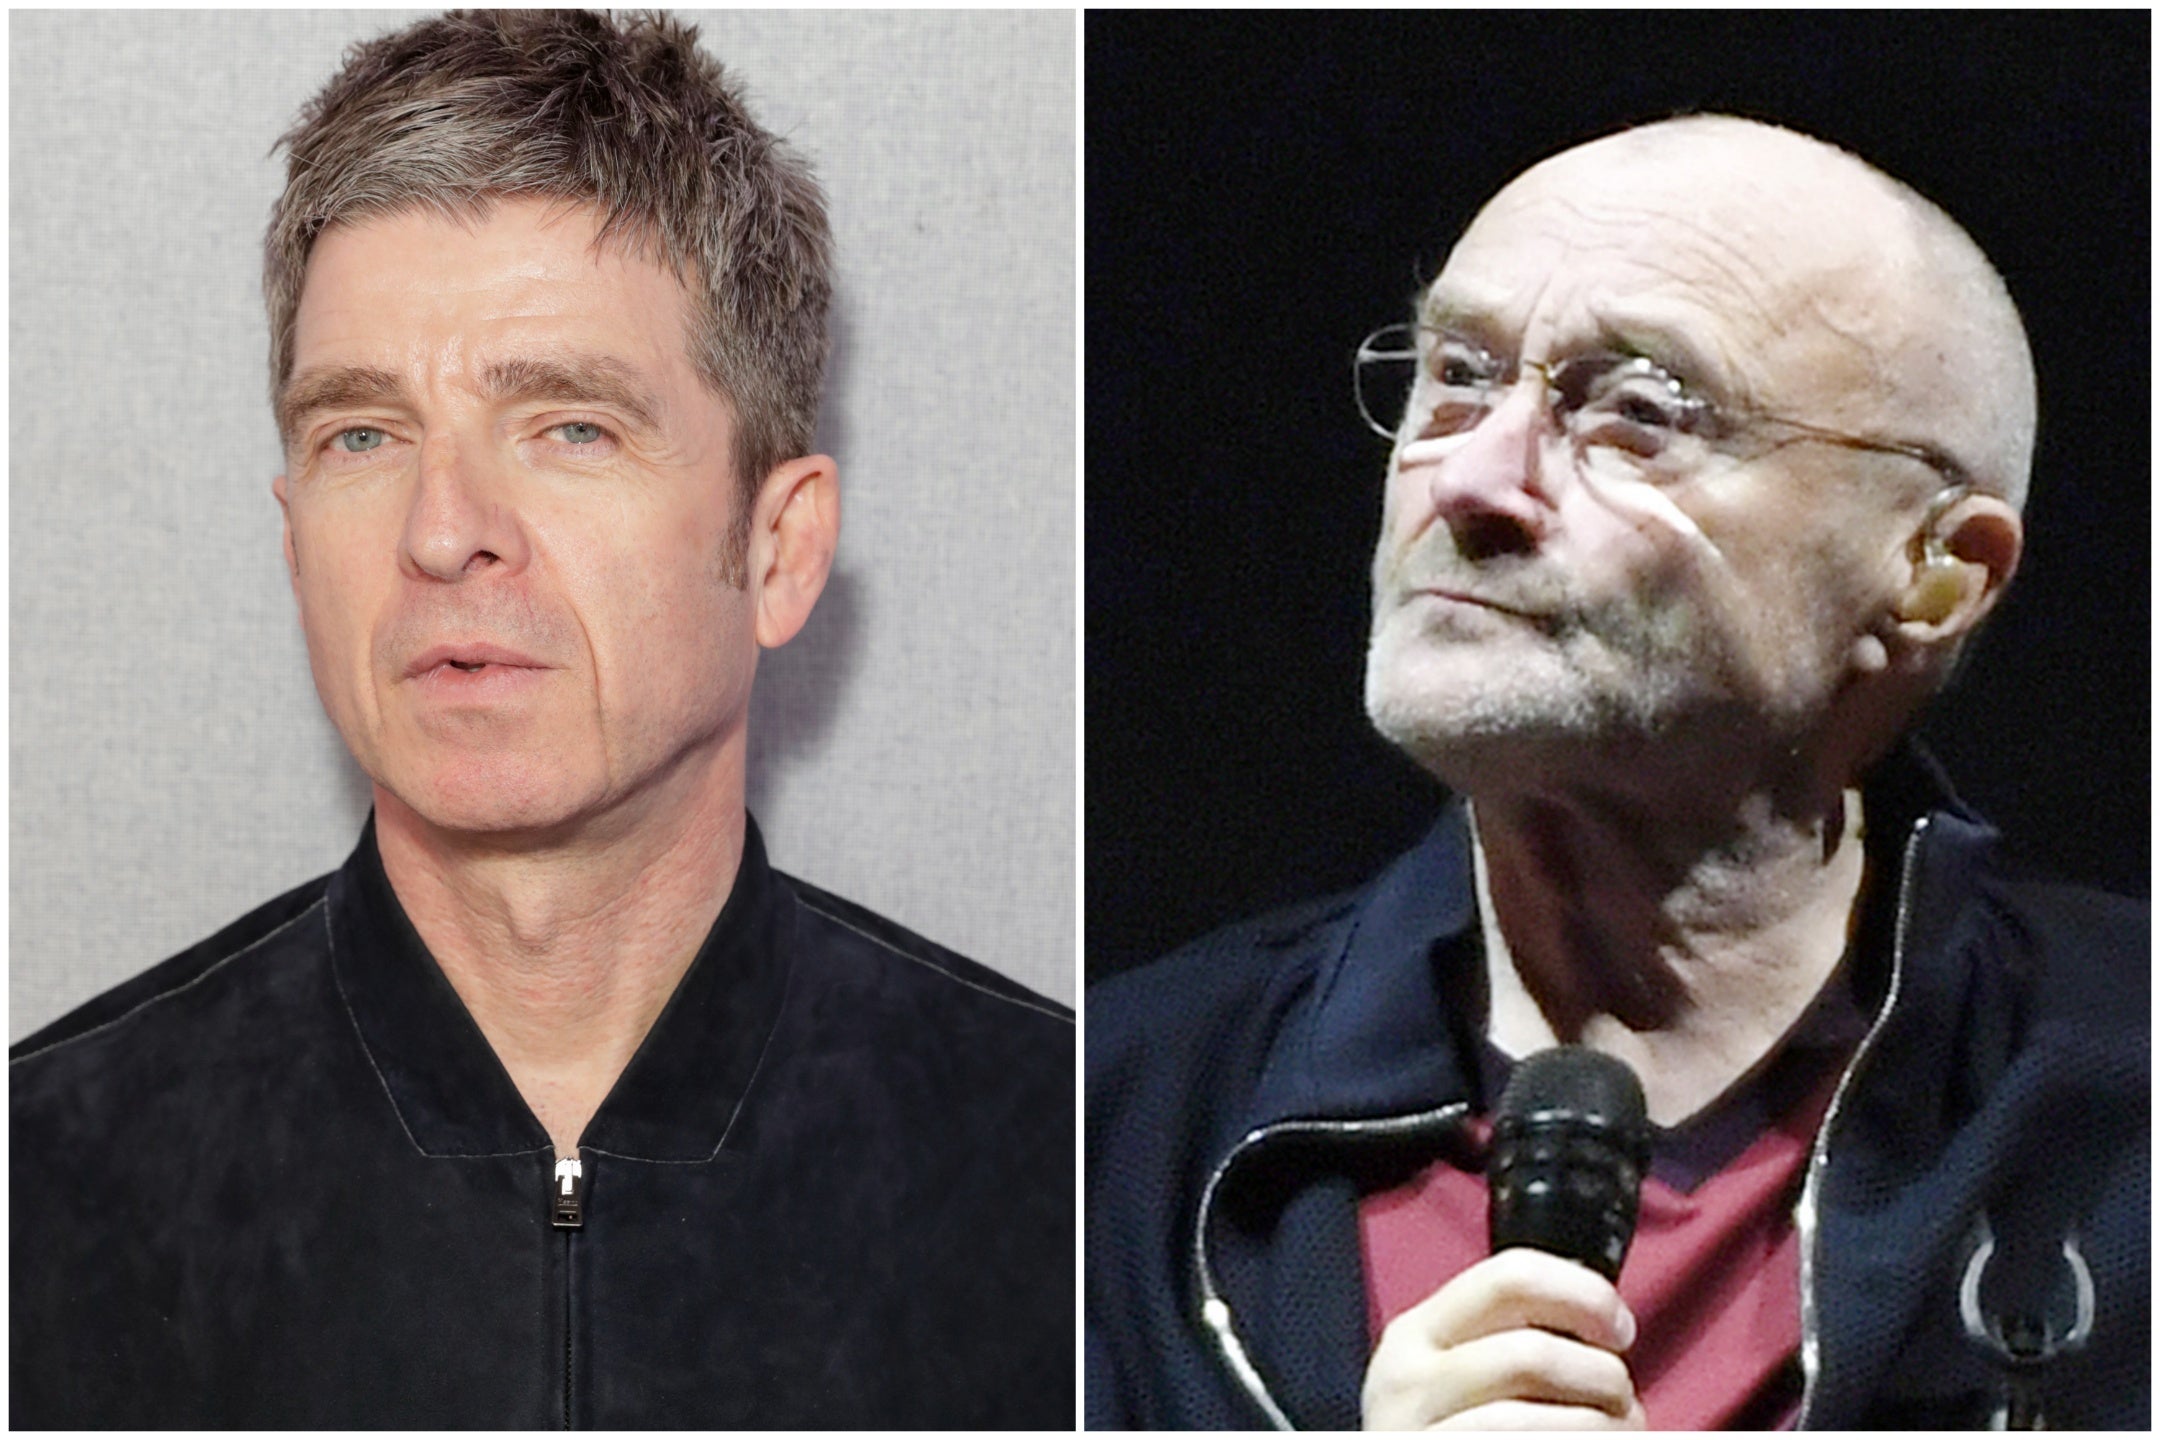 Noel Gallagher and Phil Collins